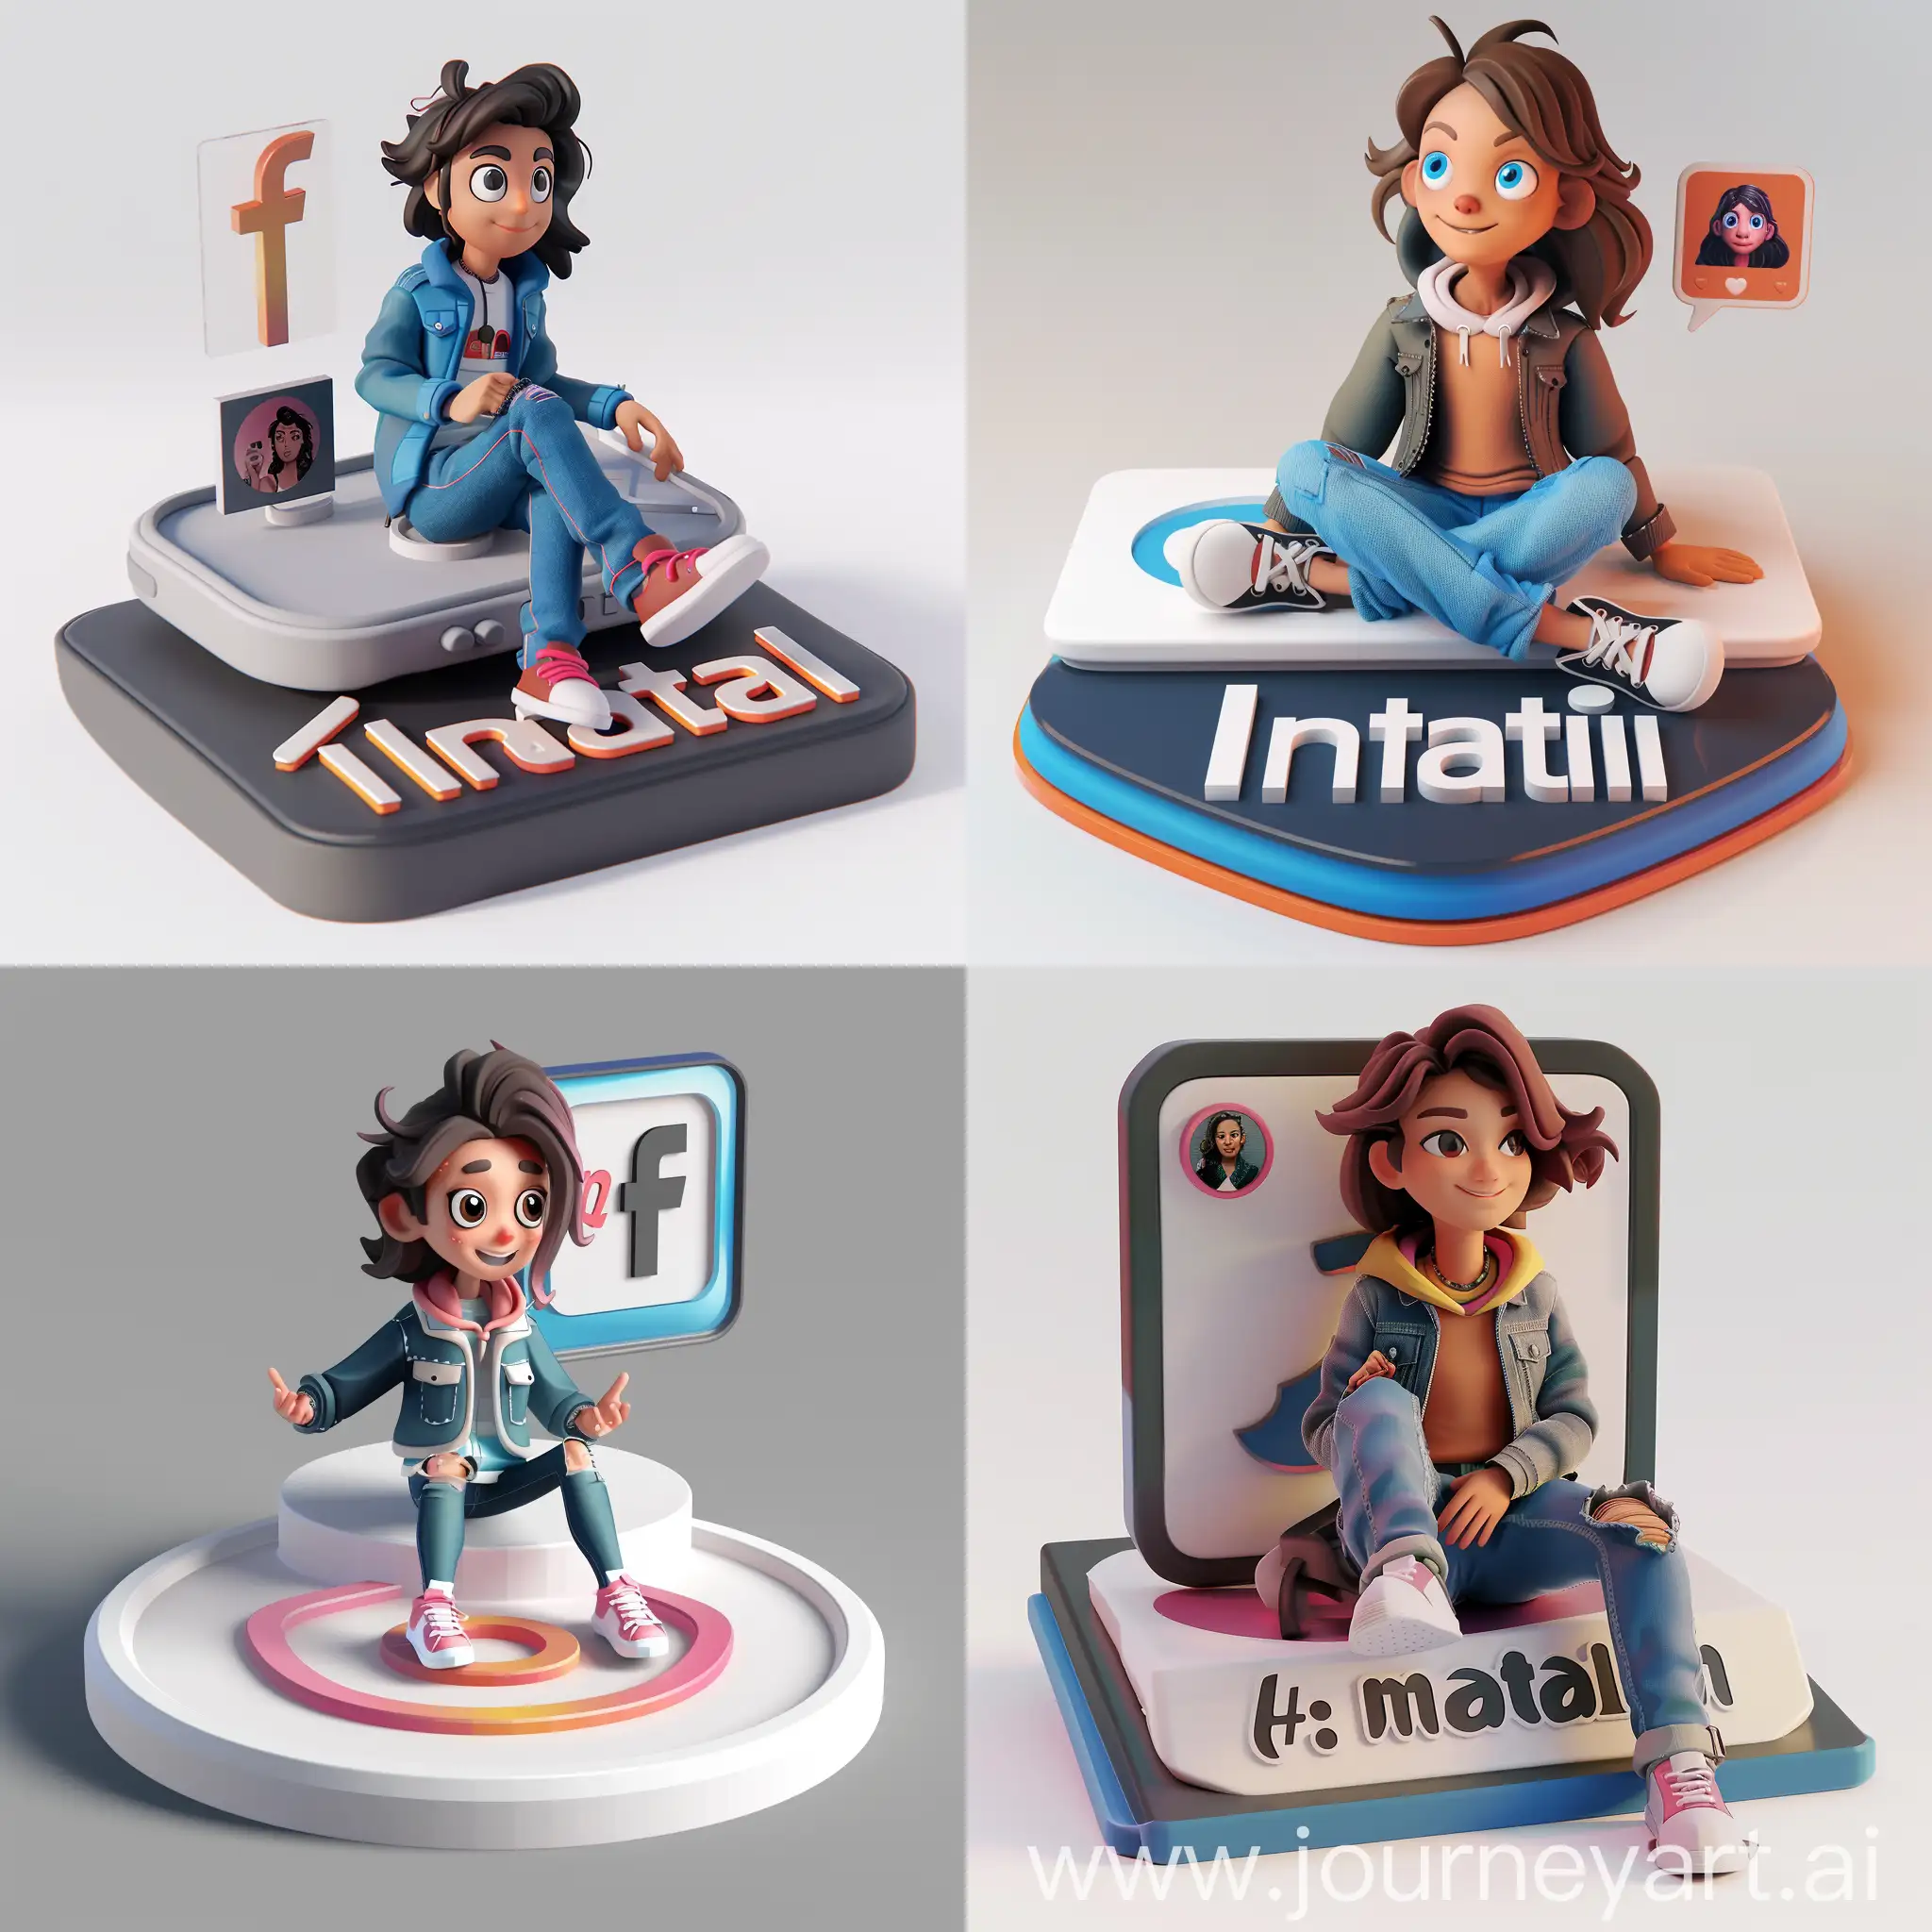 create a 3D illustration of an animated character sitting casually on top of a social media logo "Instagram". The character must wear casual modern clothing such as jeans jacket and sneakers shoes. The background of the image is a " Instagram"with a user name "@Natali" and a profile picture that match.